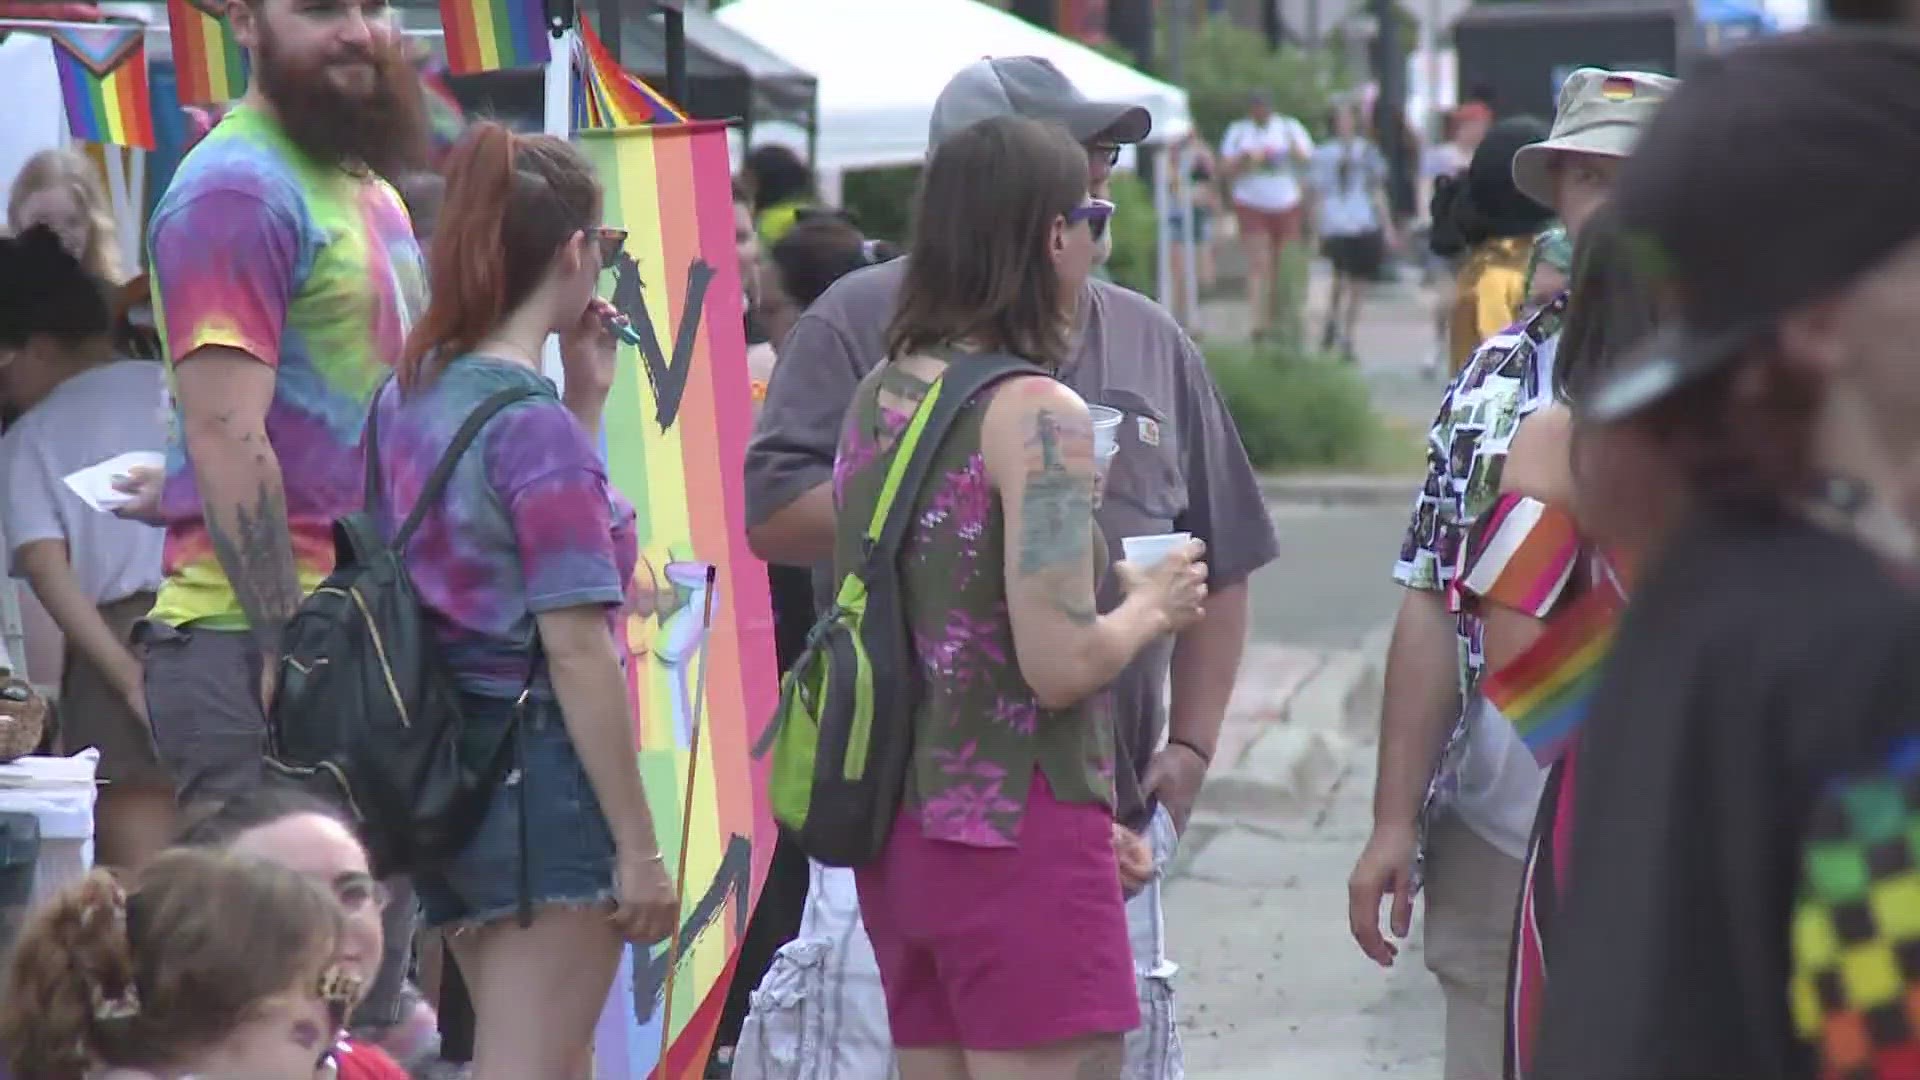 13 ON YOUR SIDE spoke with Muskegon Pride's President on how the celebration is going.